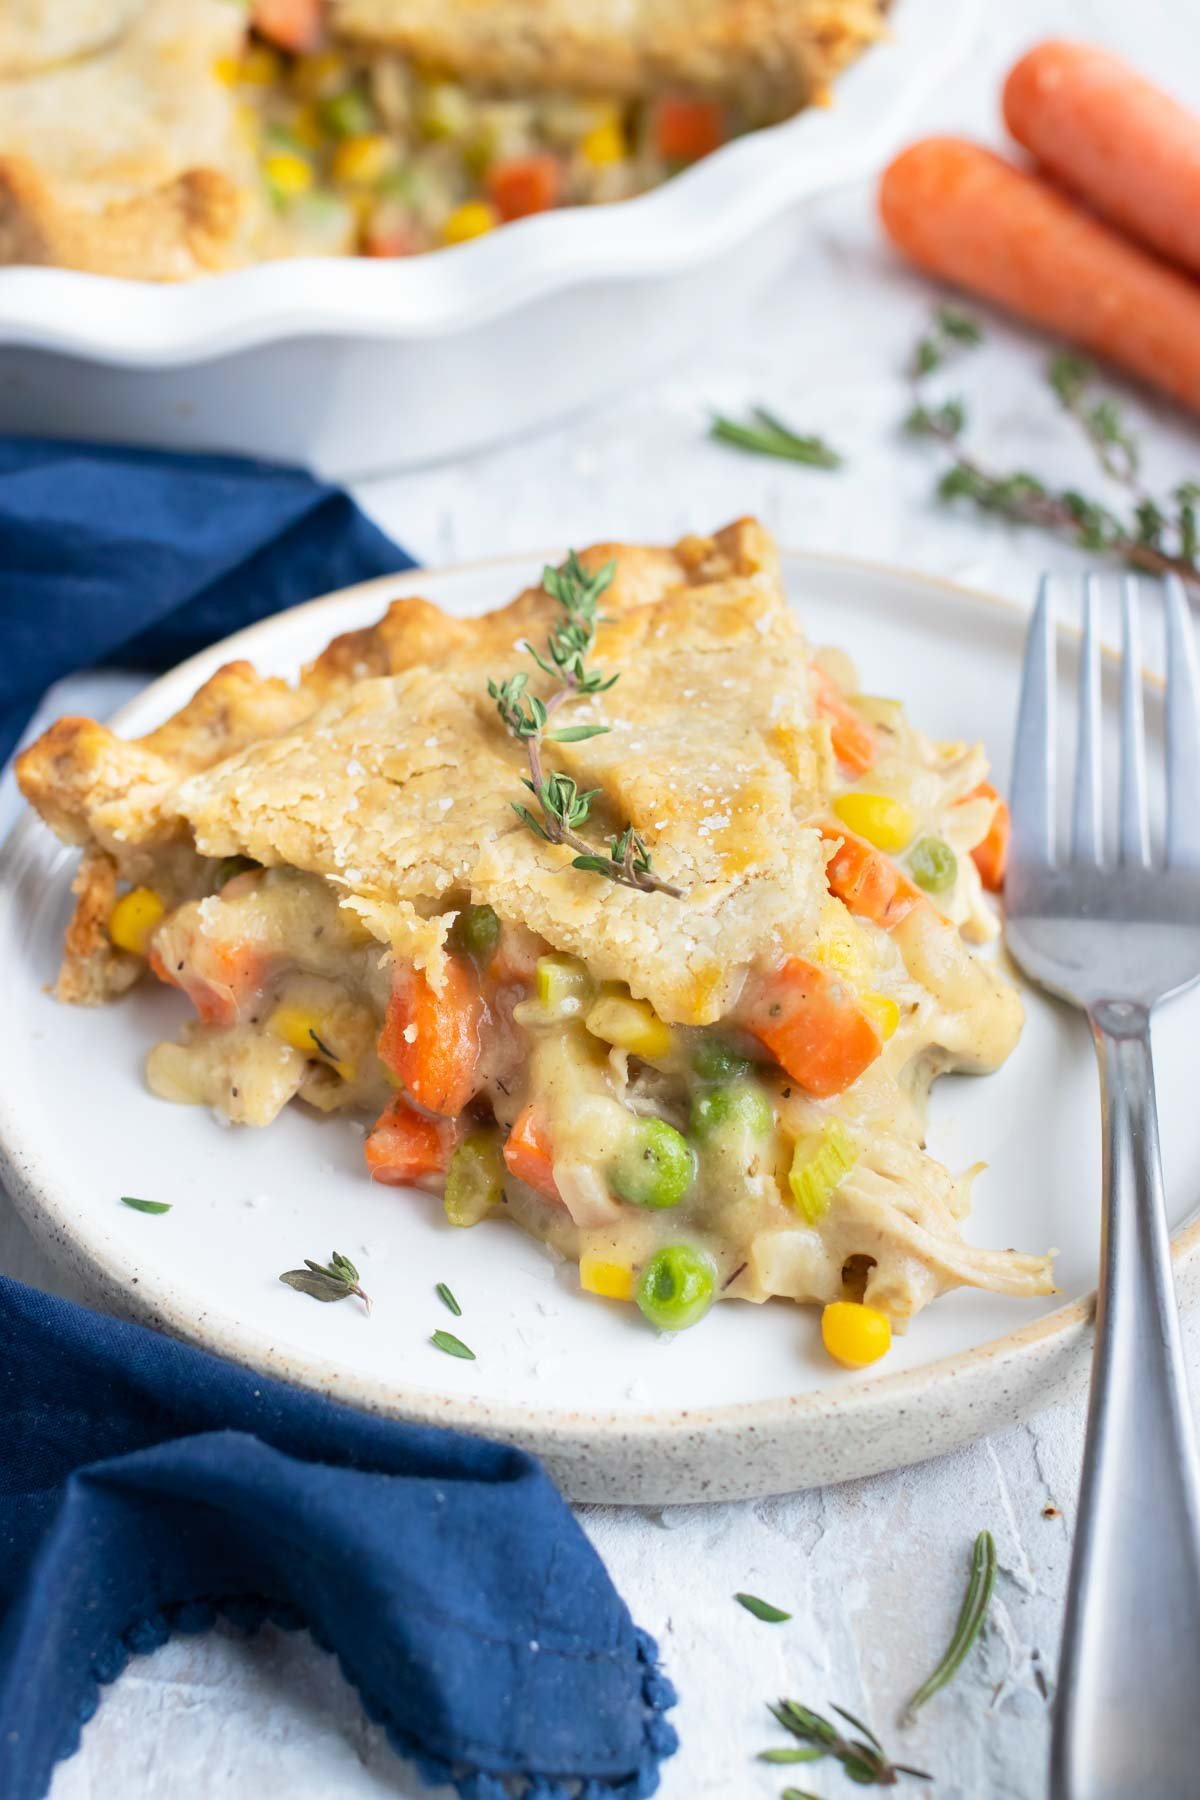 A slice of a gluten-free and dairy-free chicken pot pie recipe on a white plate with a fork.